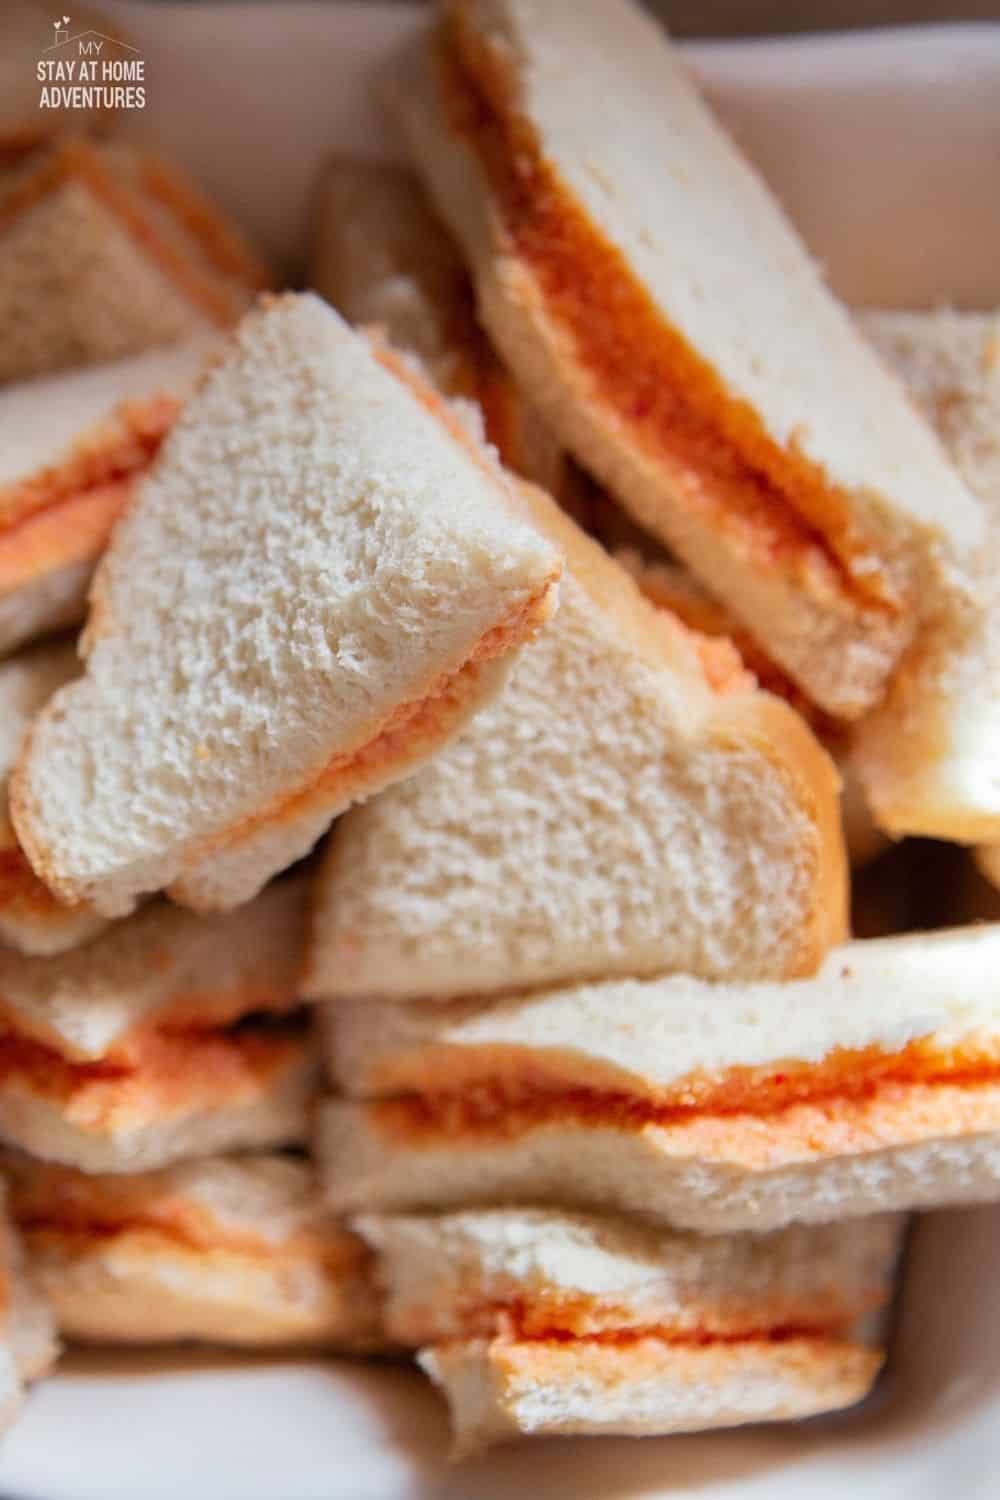 Sandwich de Mezcla is a popular Puerto Rican sandwich that is traditionally made with white sliced bread. They are always served at their parties. via @mystayathome